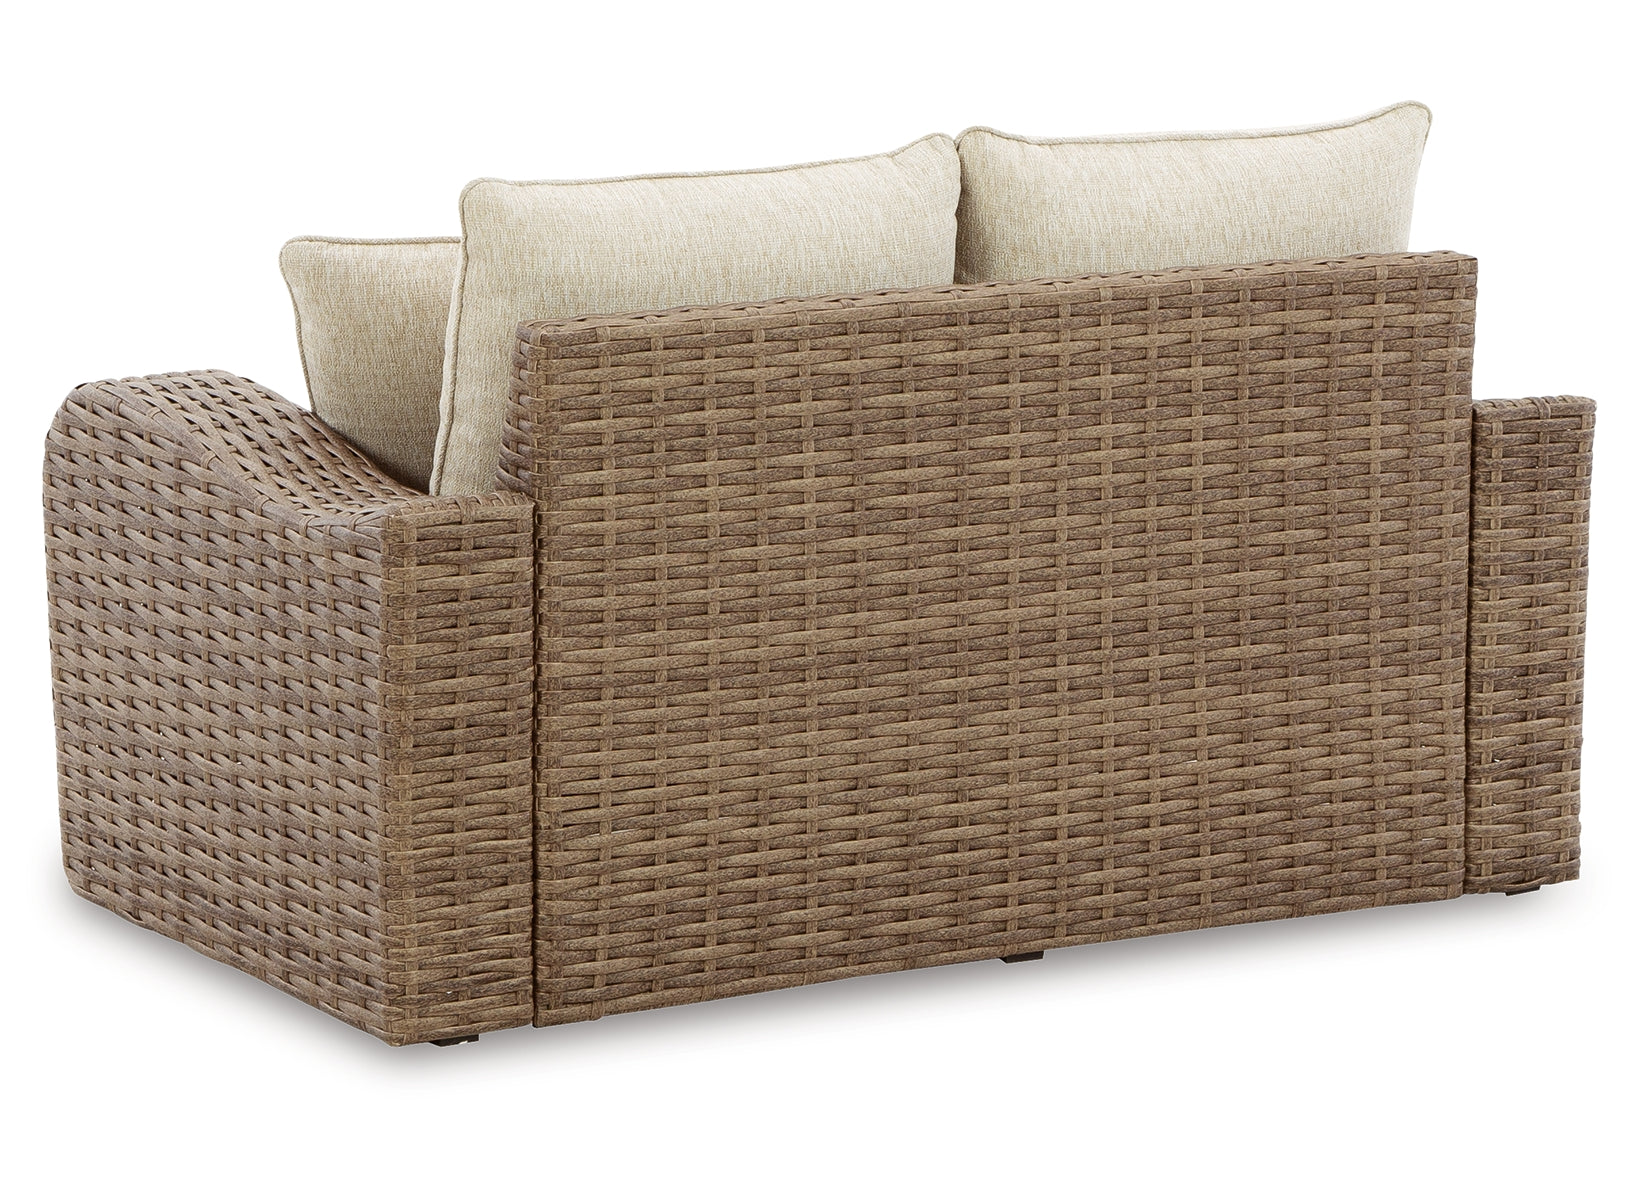 Sandy Bloom Outdoor Loveseat with Cushion